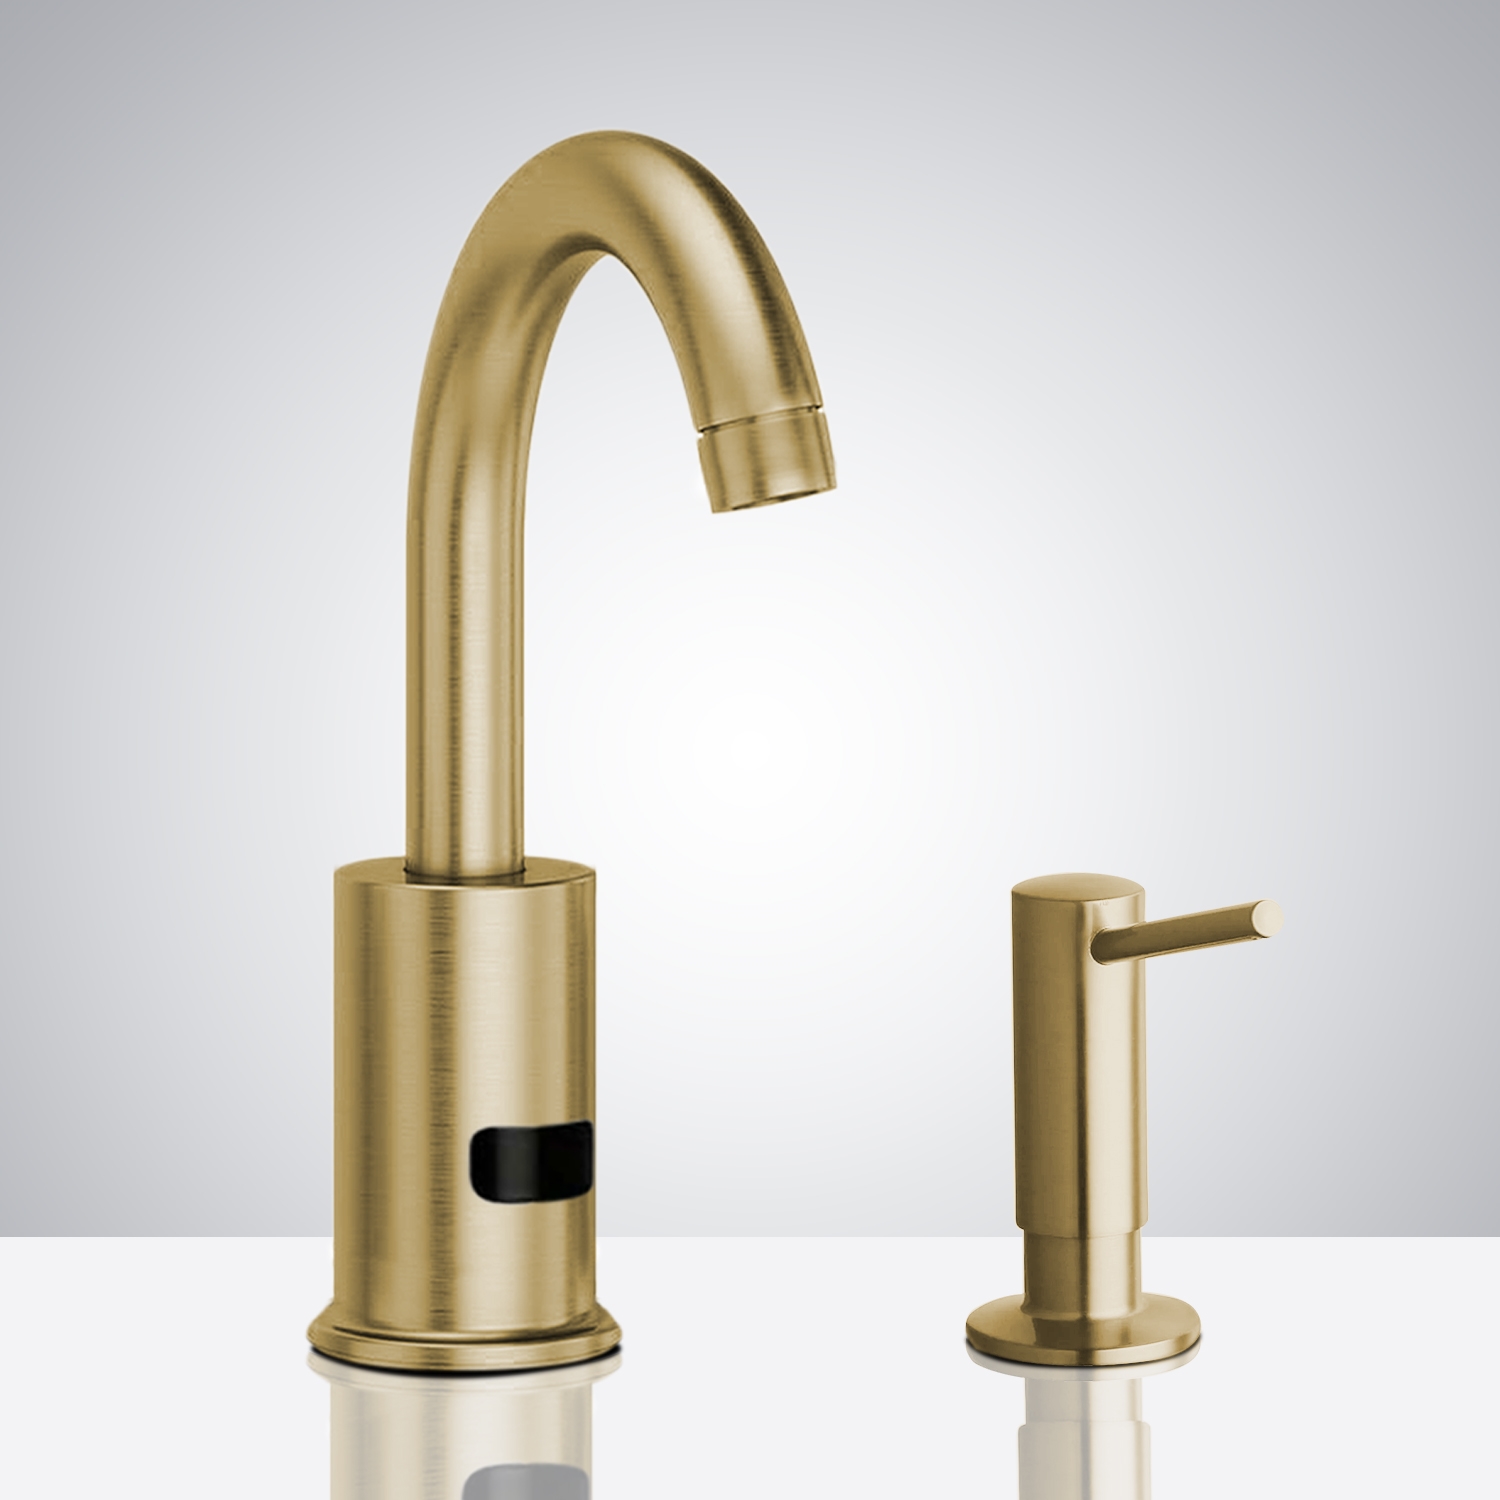 Commercial Brushed Gold Touchless Automatic Sensor Faucet & Manual Soap Dispenser